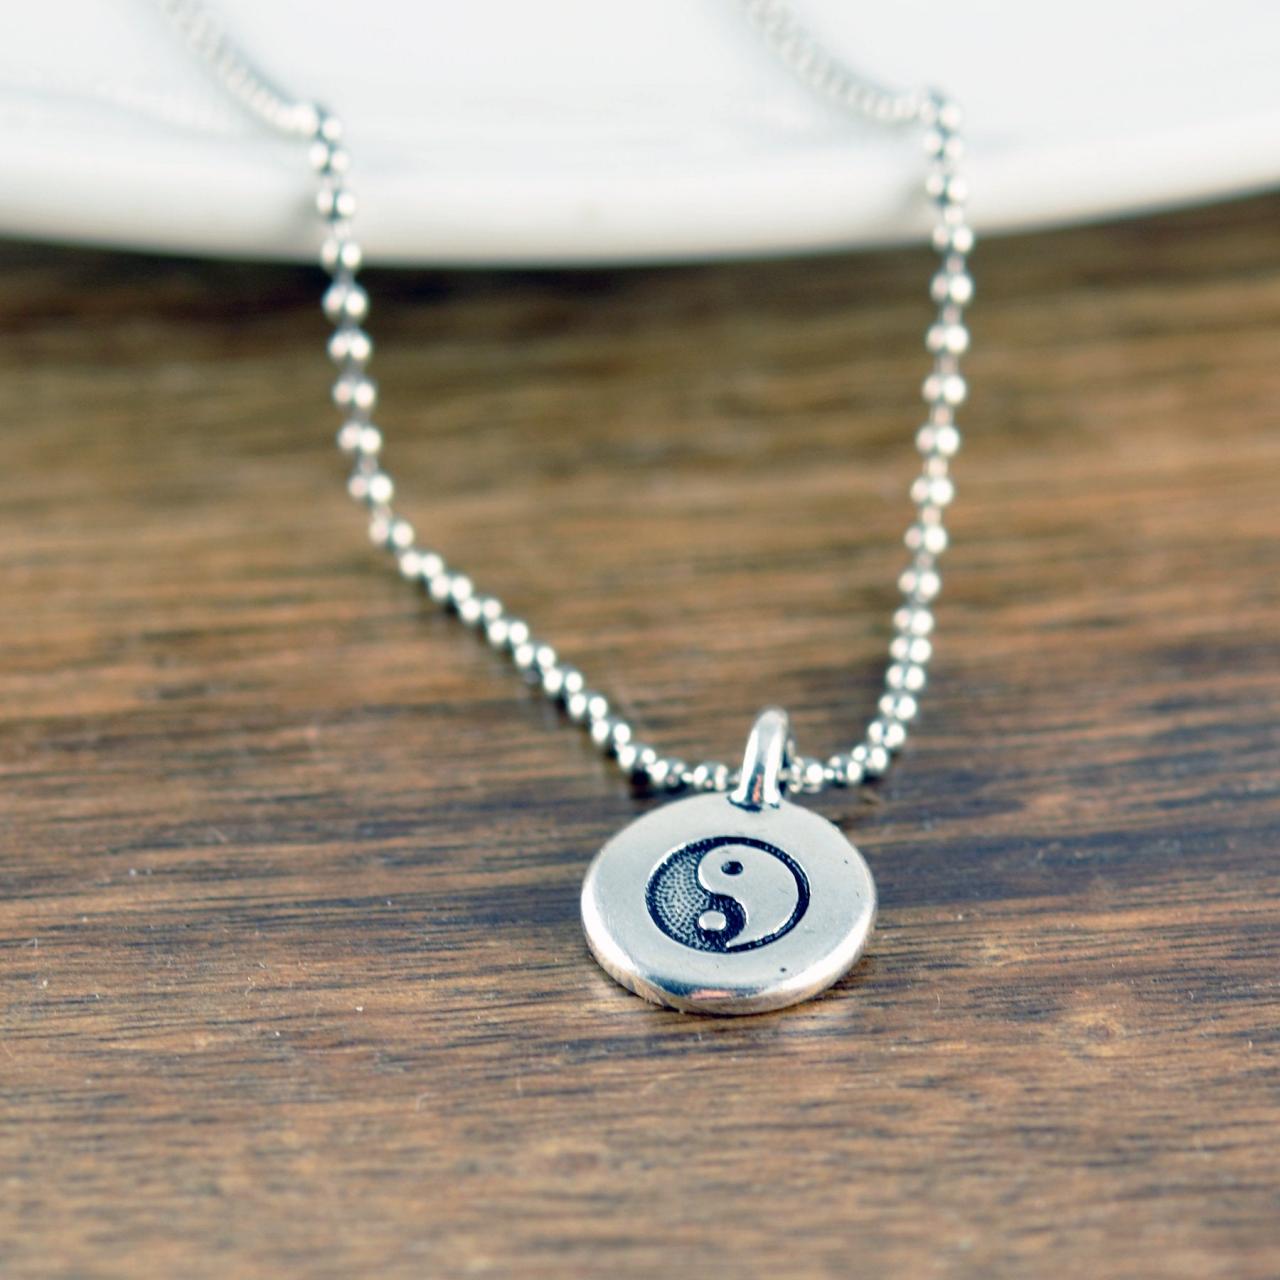 Silver Ying Yang Necklace -pendant Necklace - Mens Necklace - Boyfriend Gift - Anniversary Gift - Ying Yang Charm Pendant